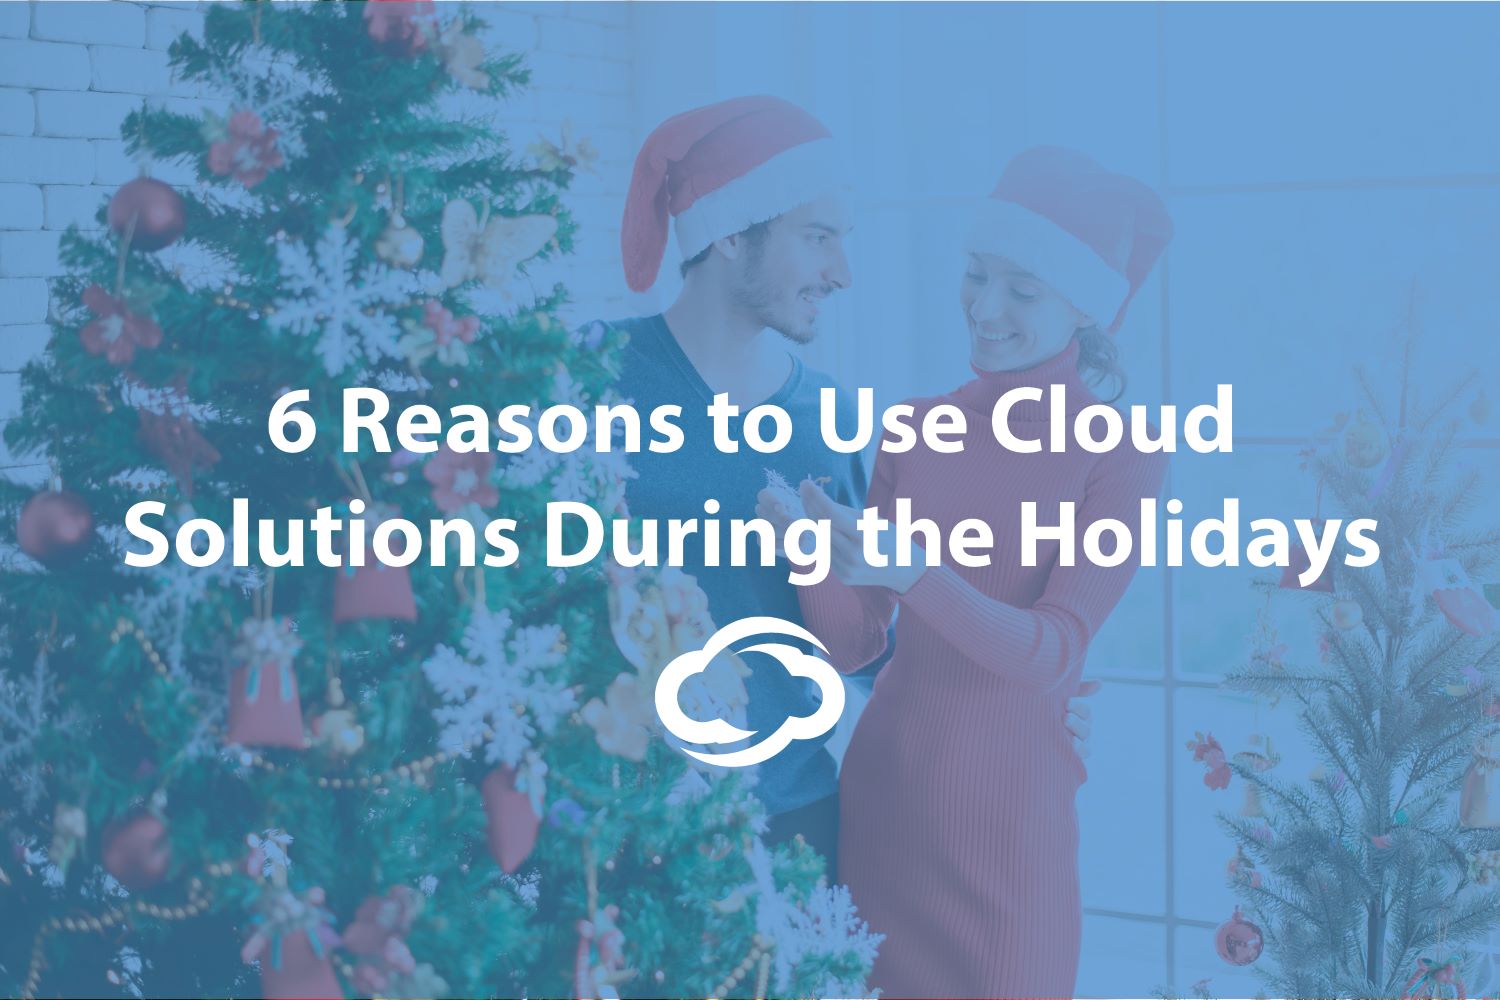 6 Reasons to Use Cloud Solutions During the Holidays